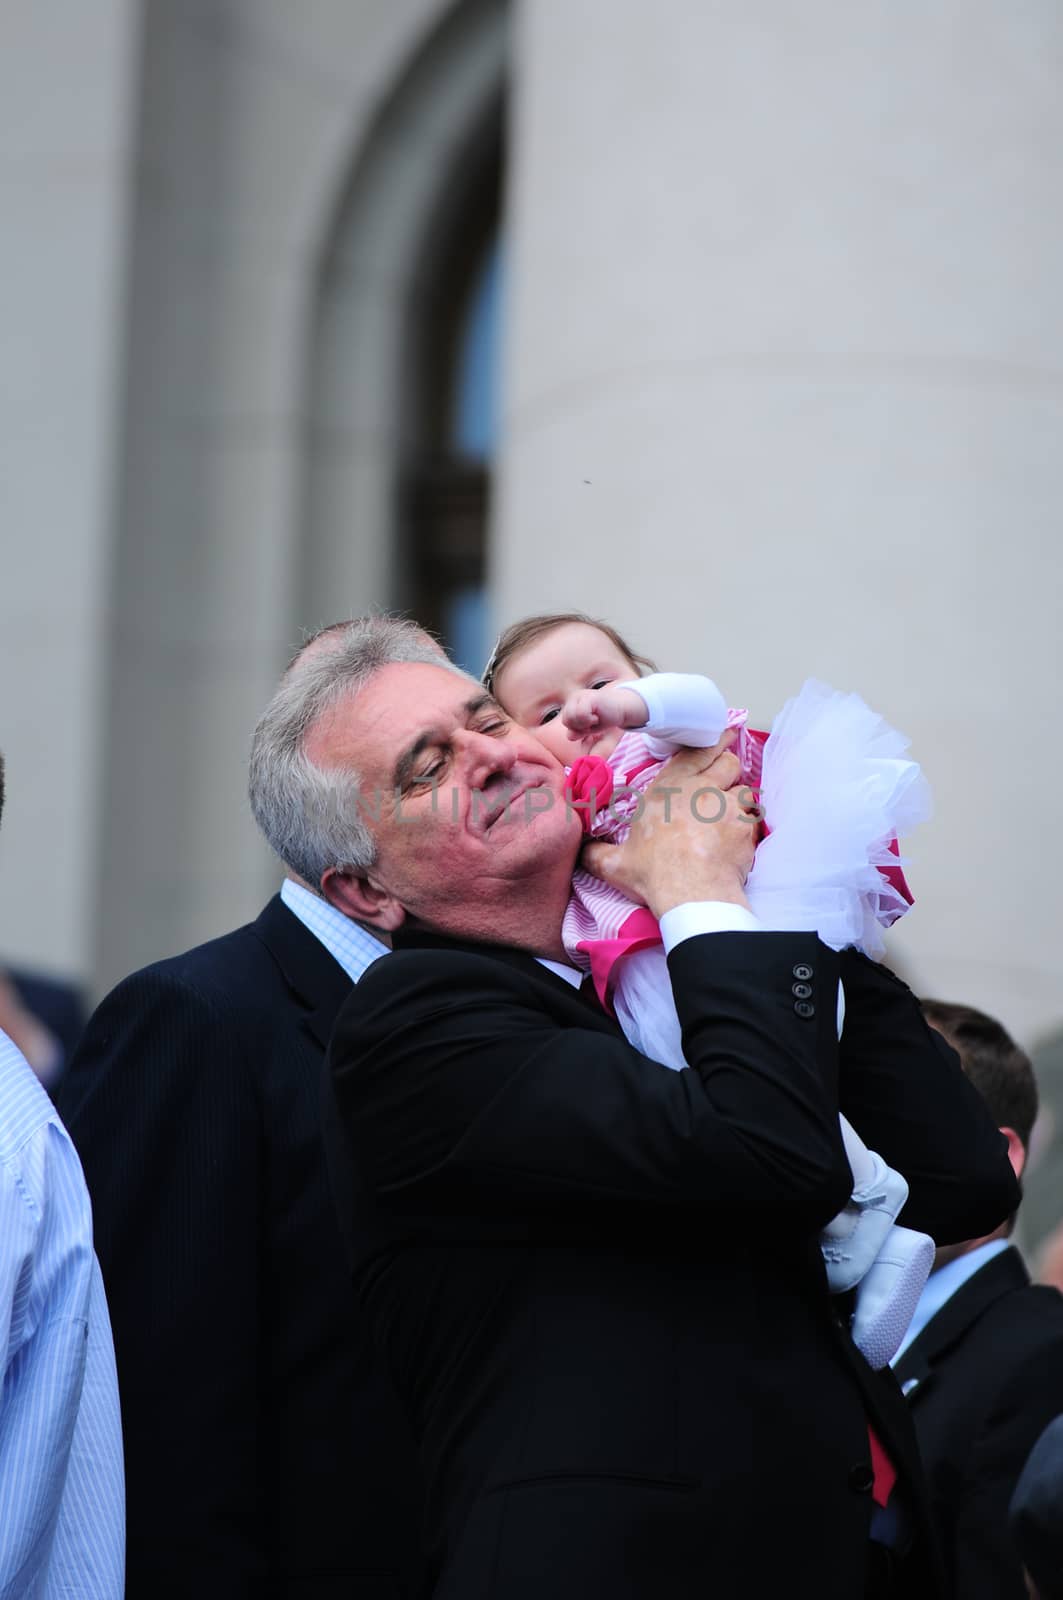 SERBIA, BELGRADE - MAY 31, 2012: President of Serbia Tomislav Nikolich holding his granddaughter high in the air on his inauguration day